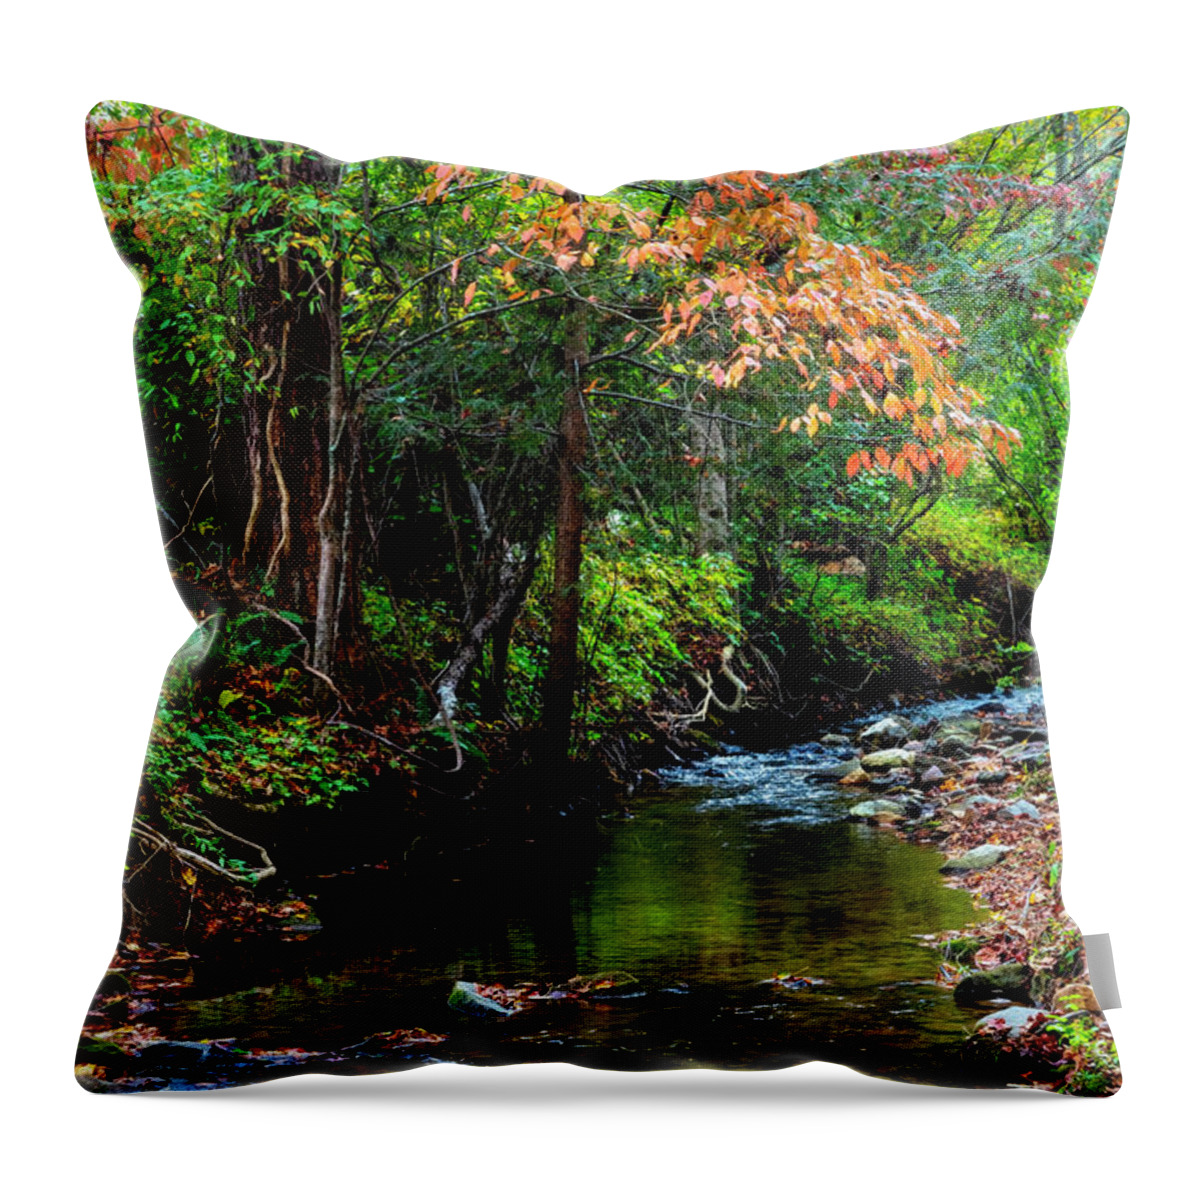 Blairsville Throw Pillow featuring the photograph Autumn Branches over the Stream by Debra and Dave Vanderlaan